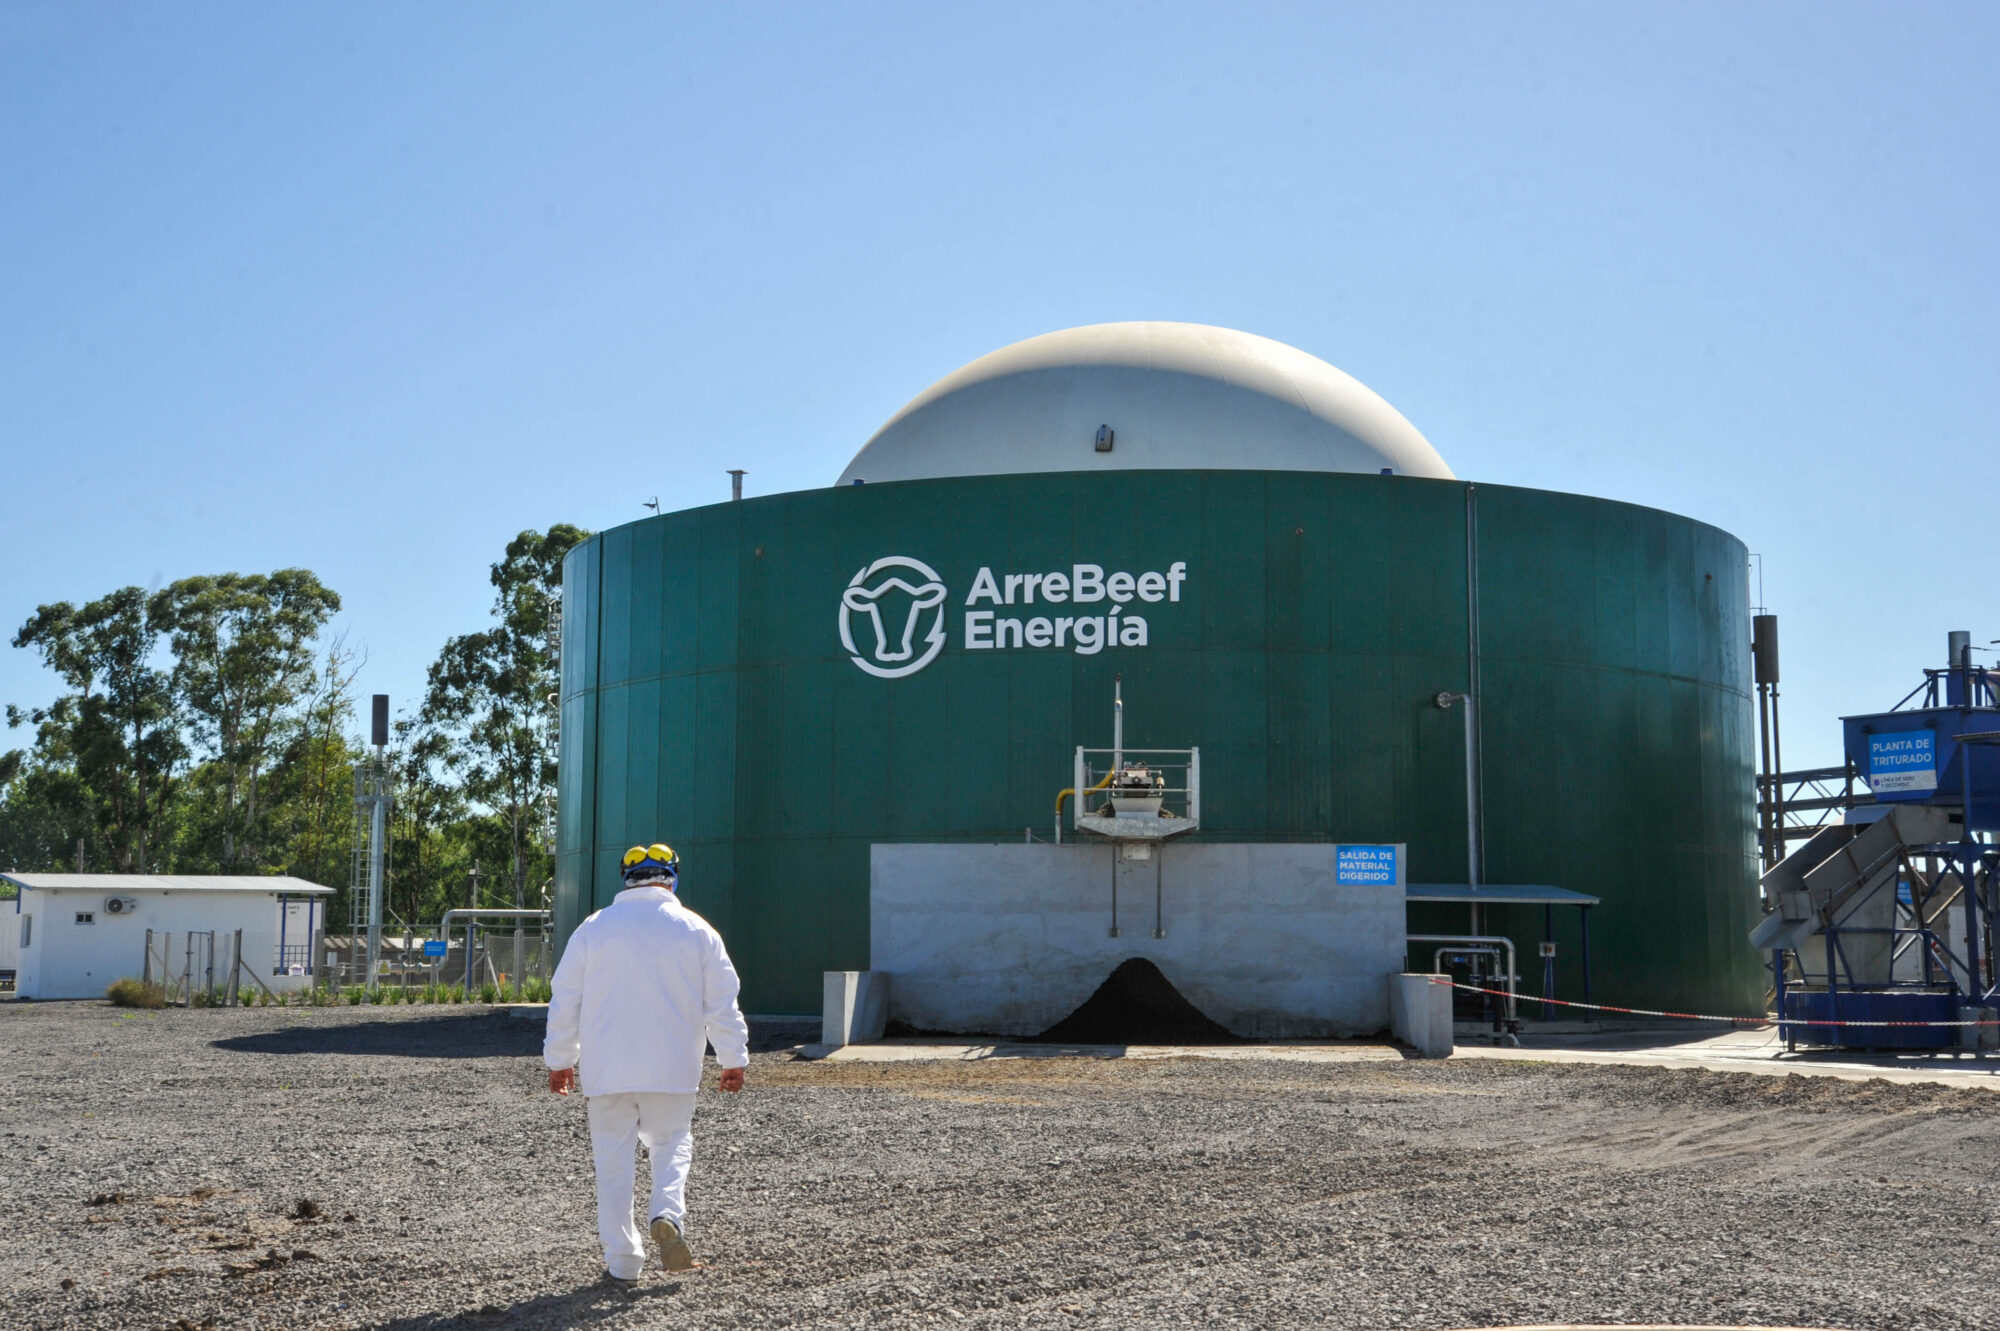 <p>Argentina’s ArreBeef is pioneering the use of animal wastes to produce biogas as a way to reduce emissions from the livestock industry. The biogas is produced in this biodigester, then burnt to create electricity for the national grid. (Image: Celina Mutti Lovera / Diálogo Chino)</p>